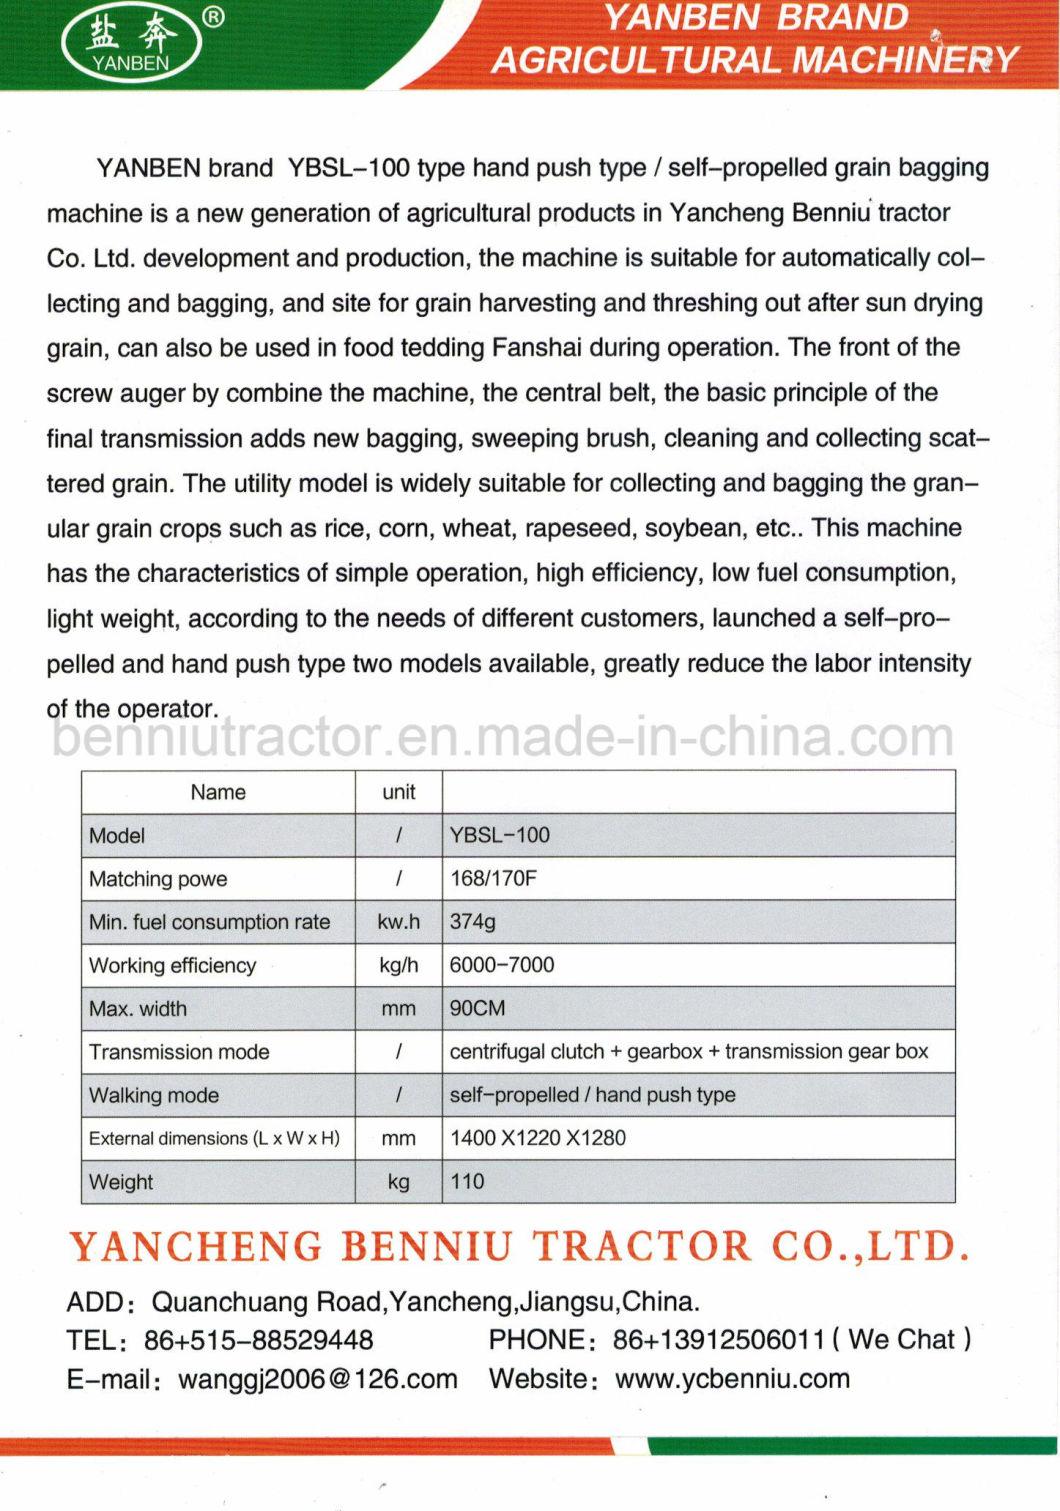 Ybsl-100 Grain Filling and Bagging Machine